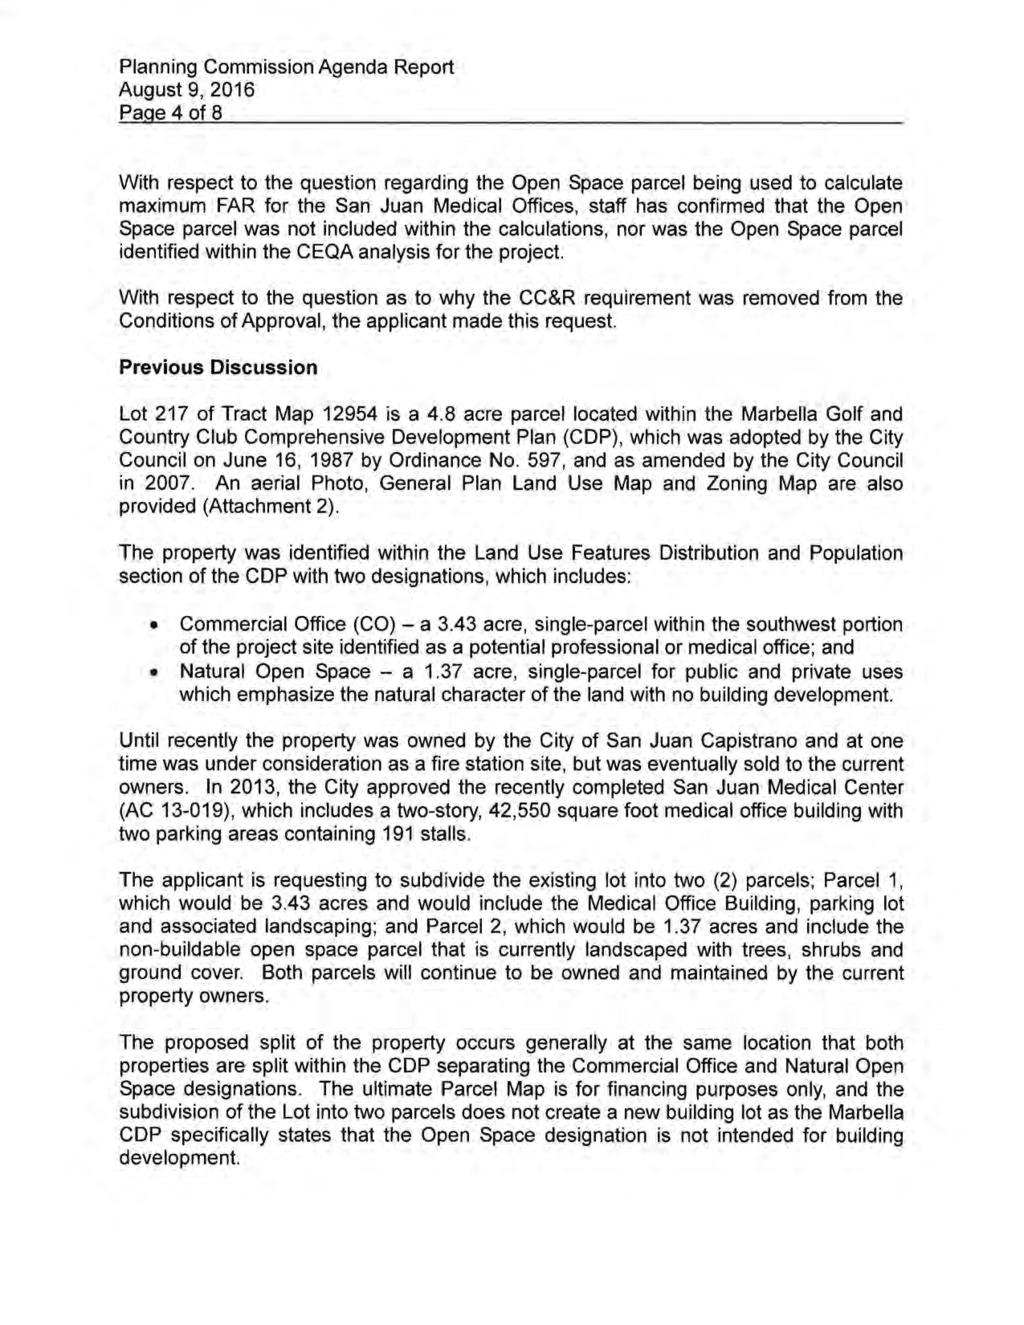 Planning Commission Agenda Report August 9, 2016 Page 4 of 8 With respect to the question regarding the Open Space parcel being used to calculate maximum FAR for the San Juan Medical Offices, staff